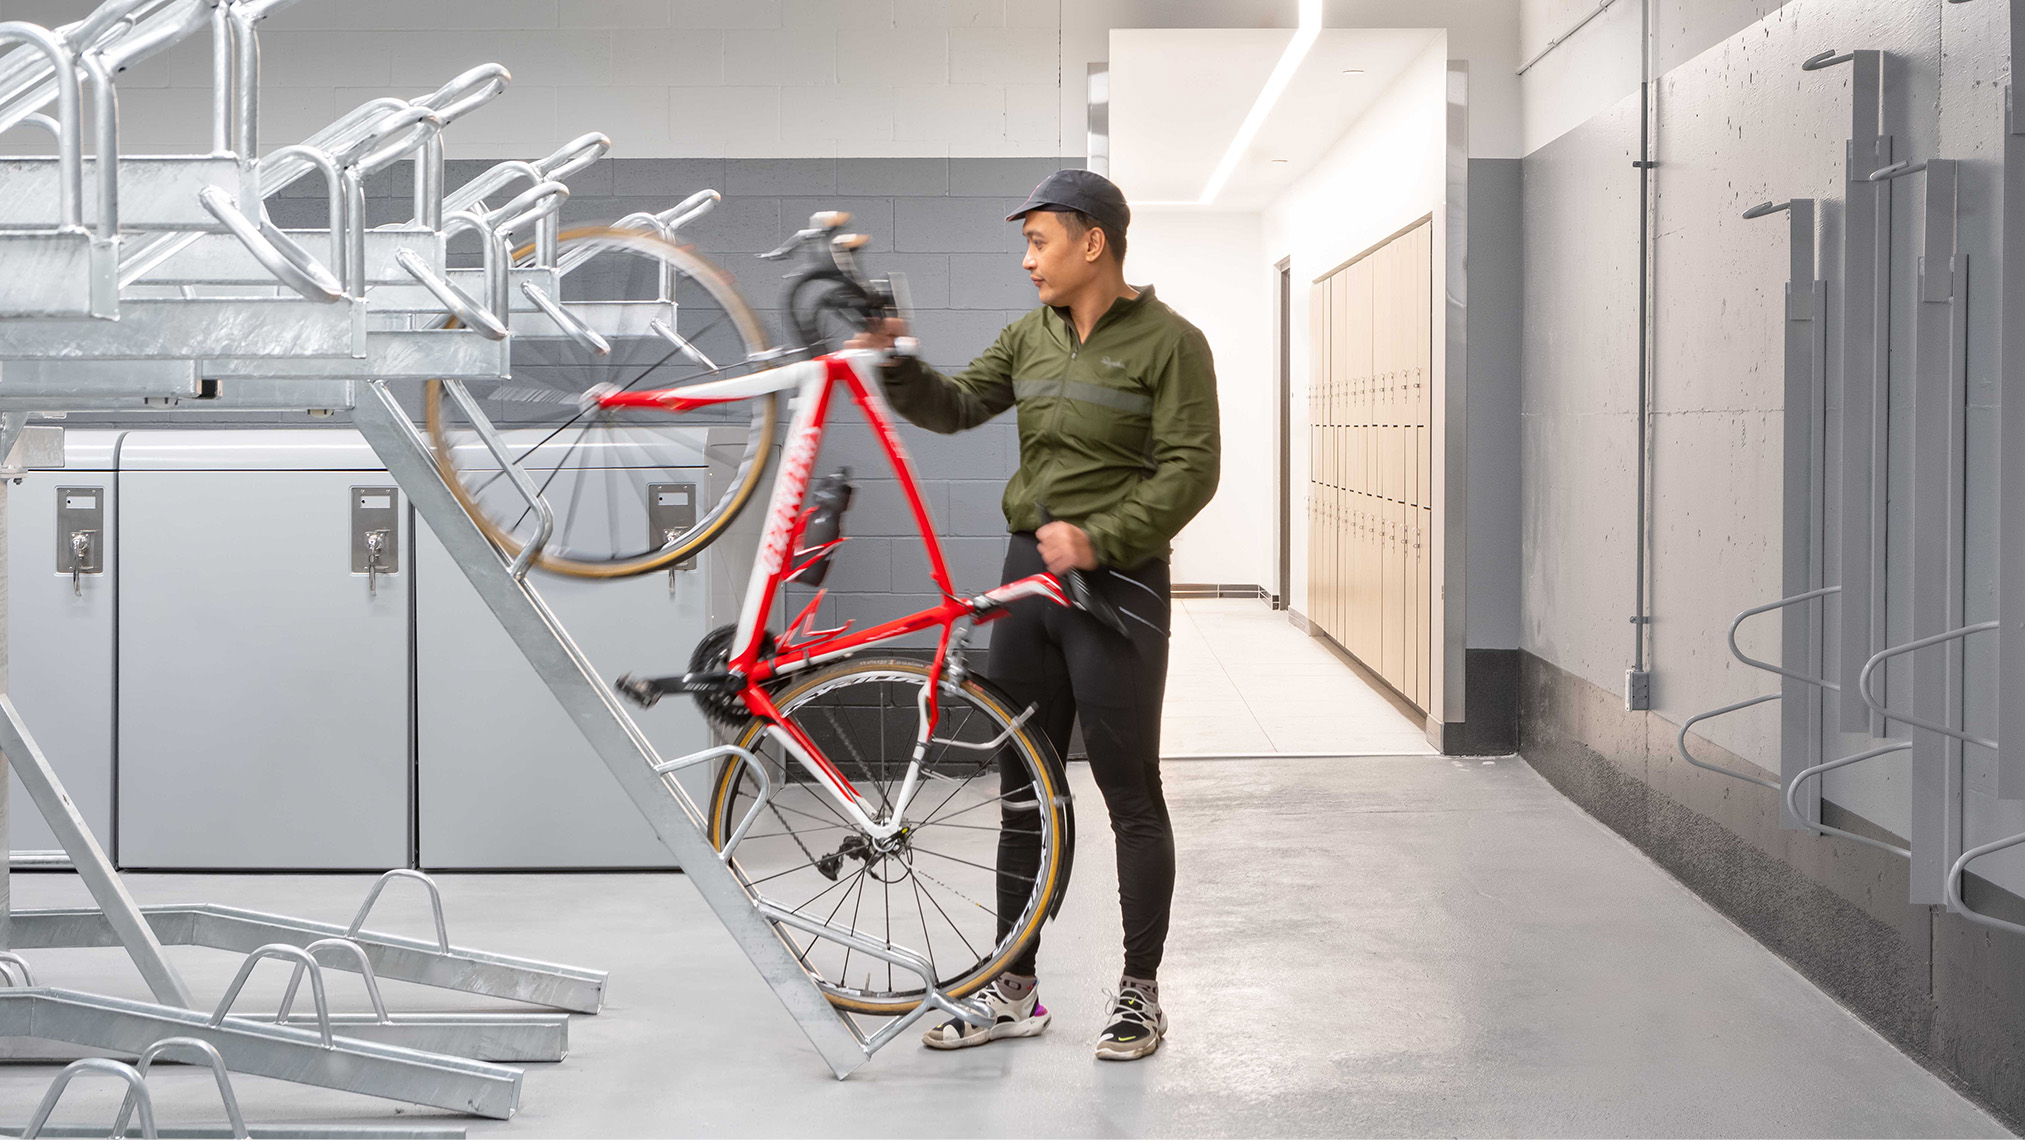 Image showing a man placing a bicycle in a horizontal double-stacked bike storage unit.